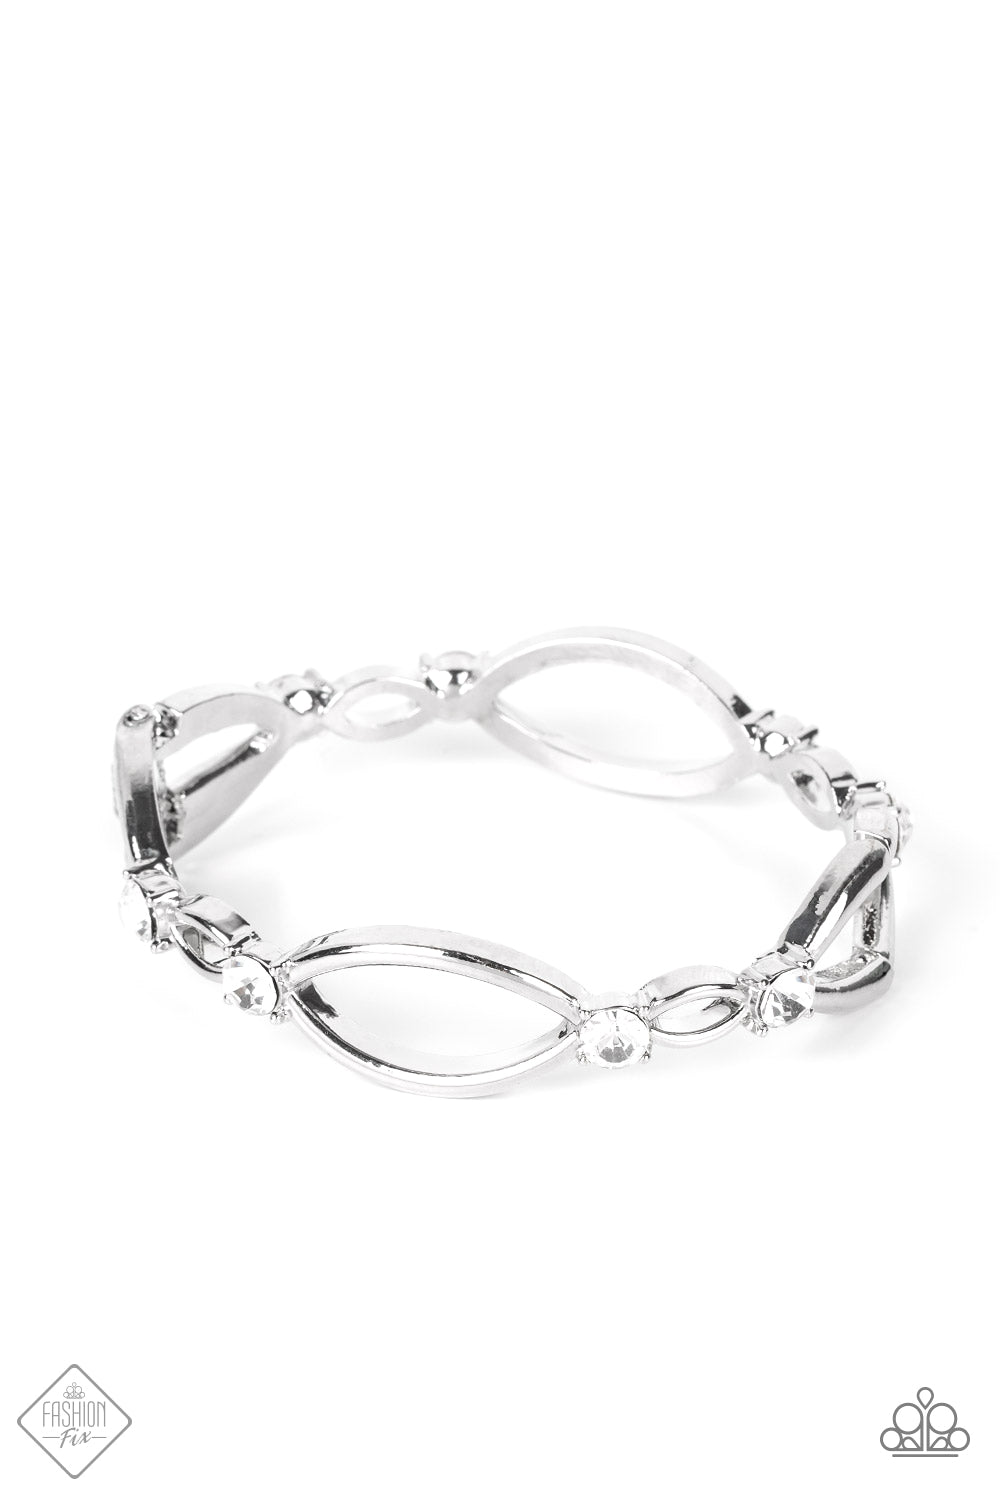 Interwoven Illusion - Silver Gem Hinged Closure Fashion Bracelet - Paparazzi Accessories - Airy marquise-shaped frames are dotted with brilliant white rhinestones as they connect end to end across the wrist. The high sheen silver and sparkling gems offer a modern take on a classic style. Features a hinged closure. Sold as one individual bracelet.